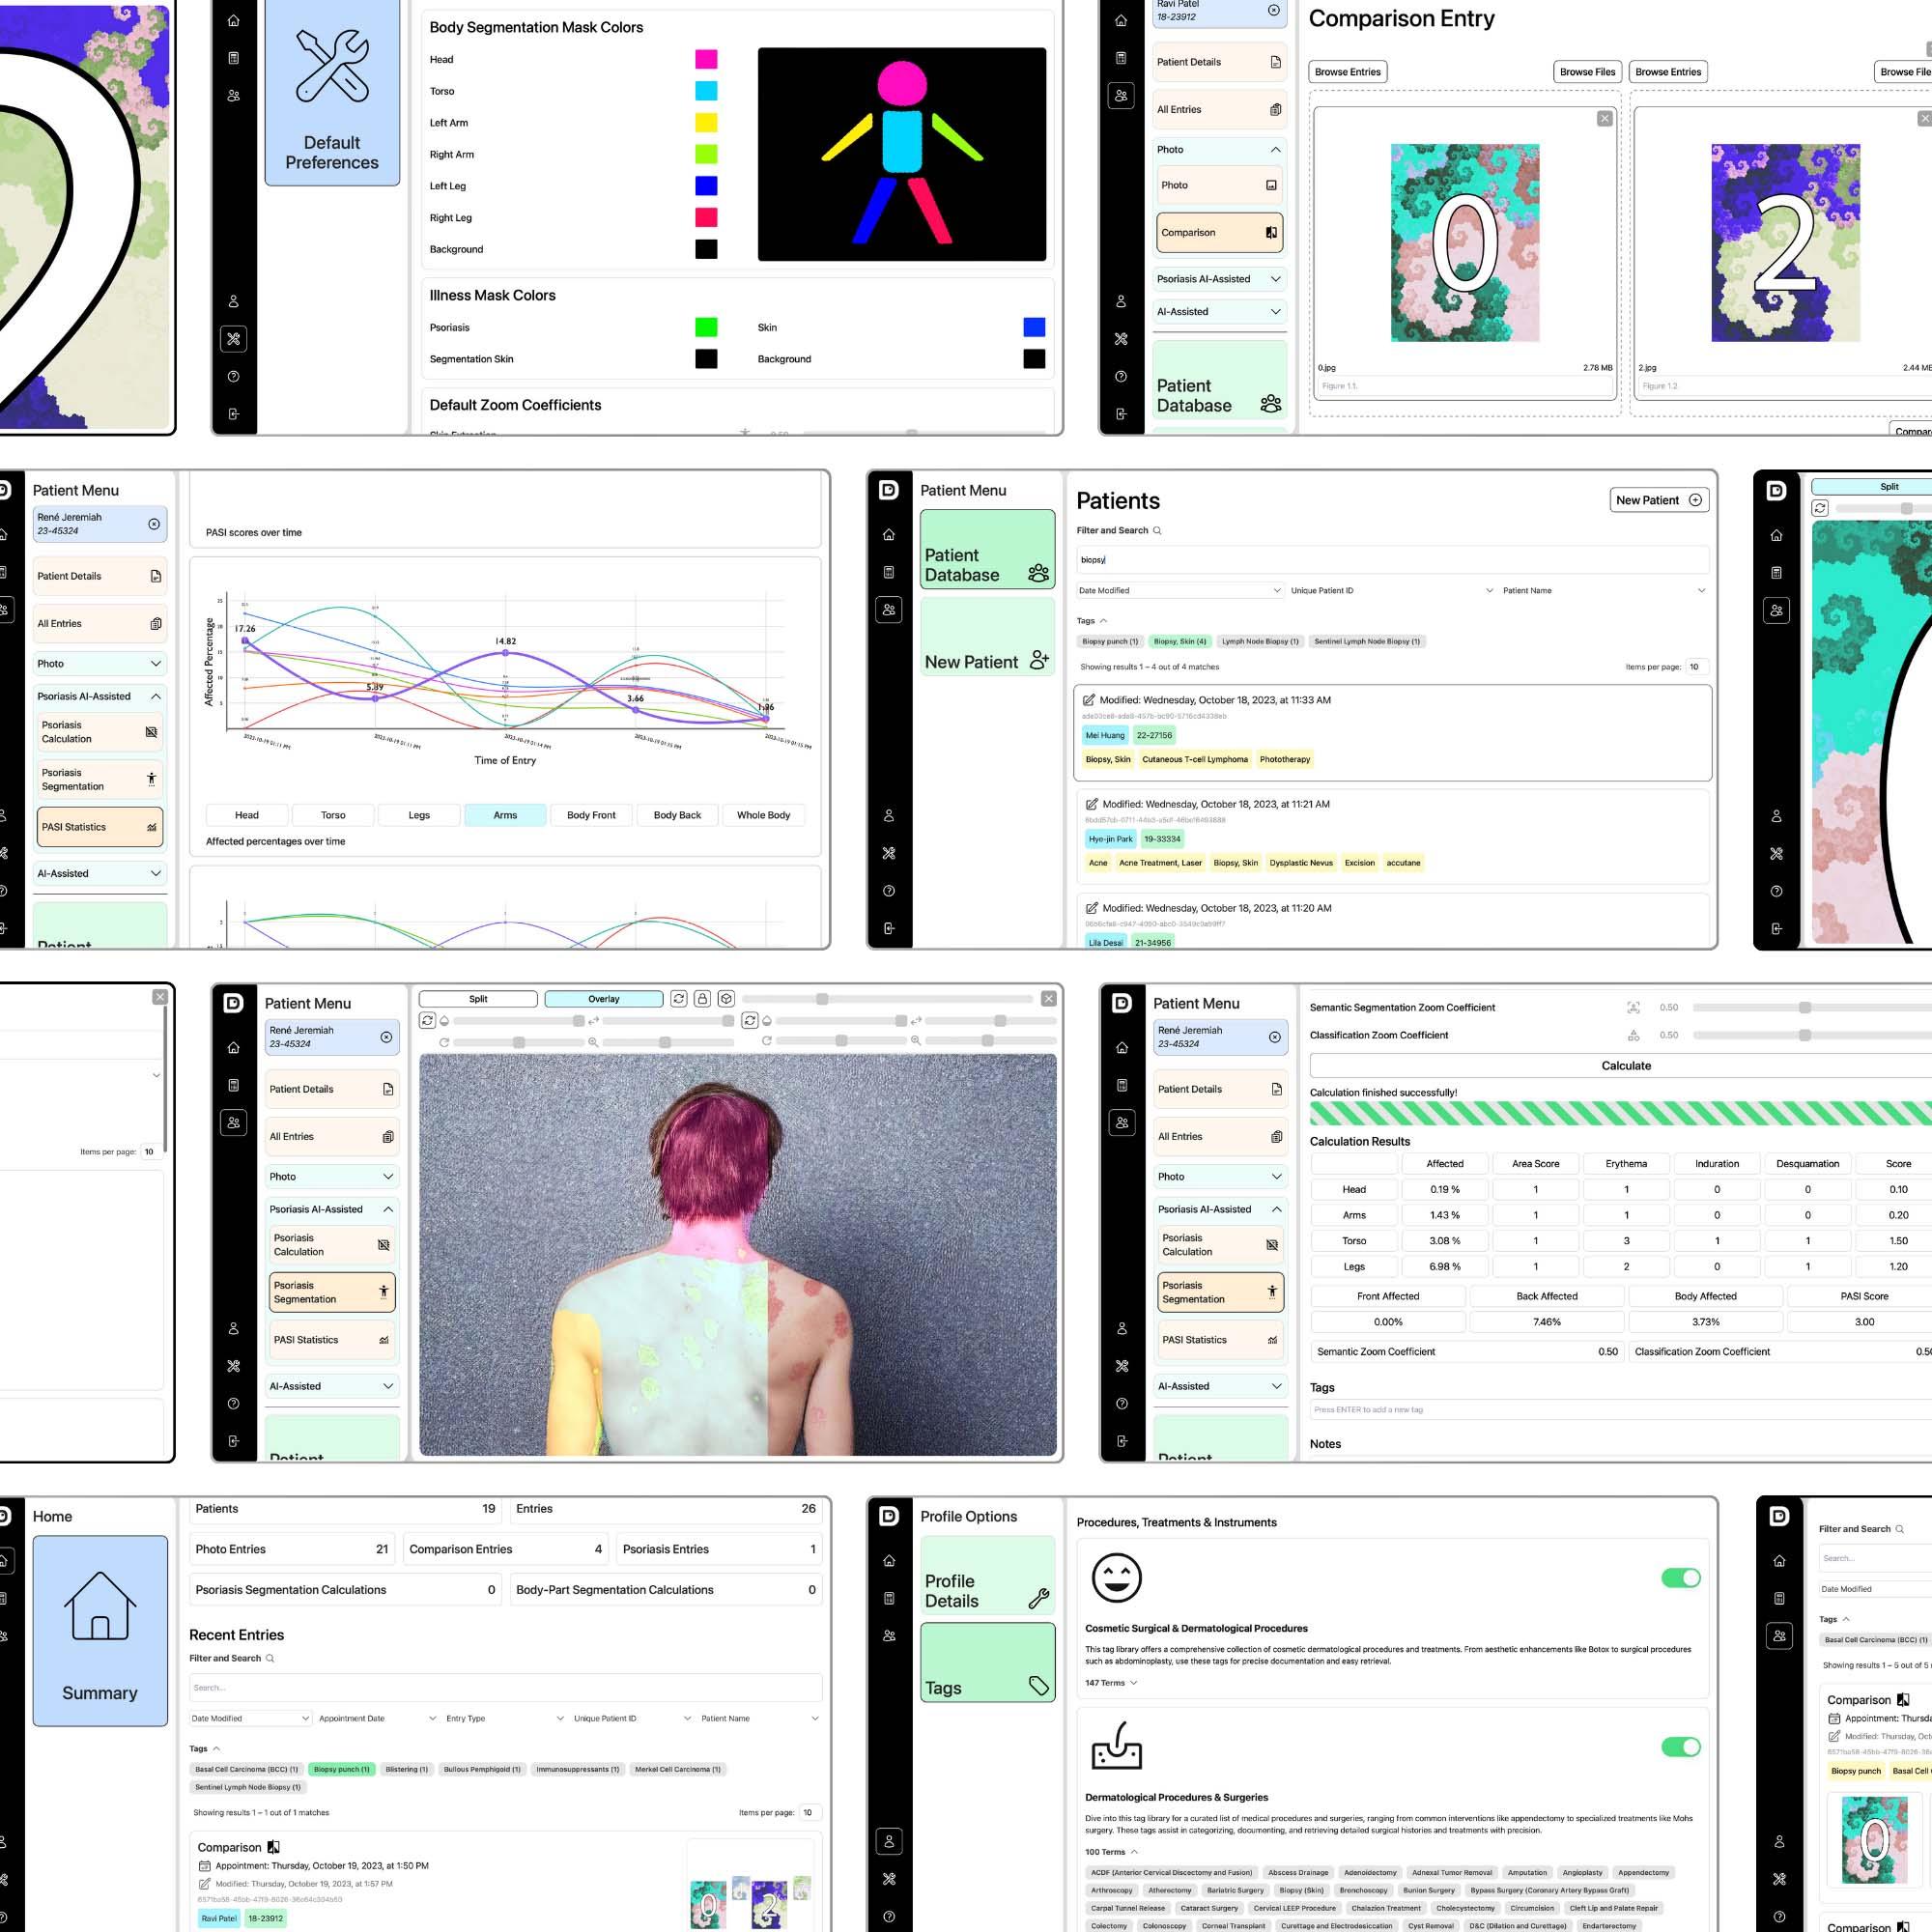 Clinical Dashboard V2.1: A Leap in Usability and Features